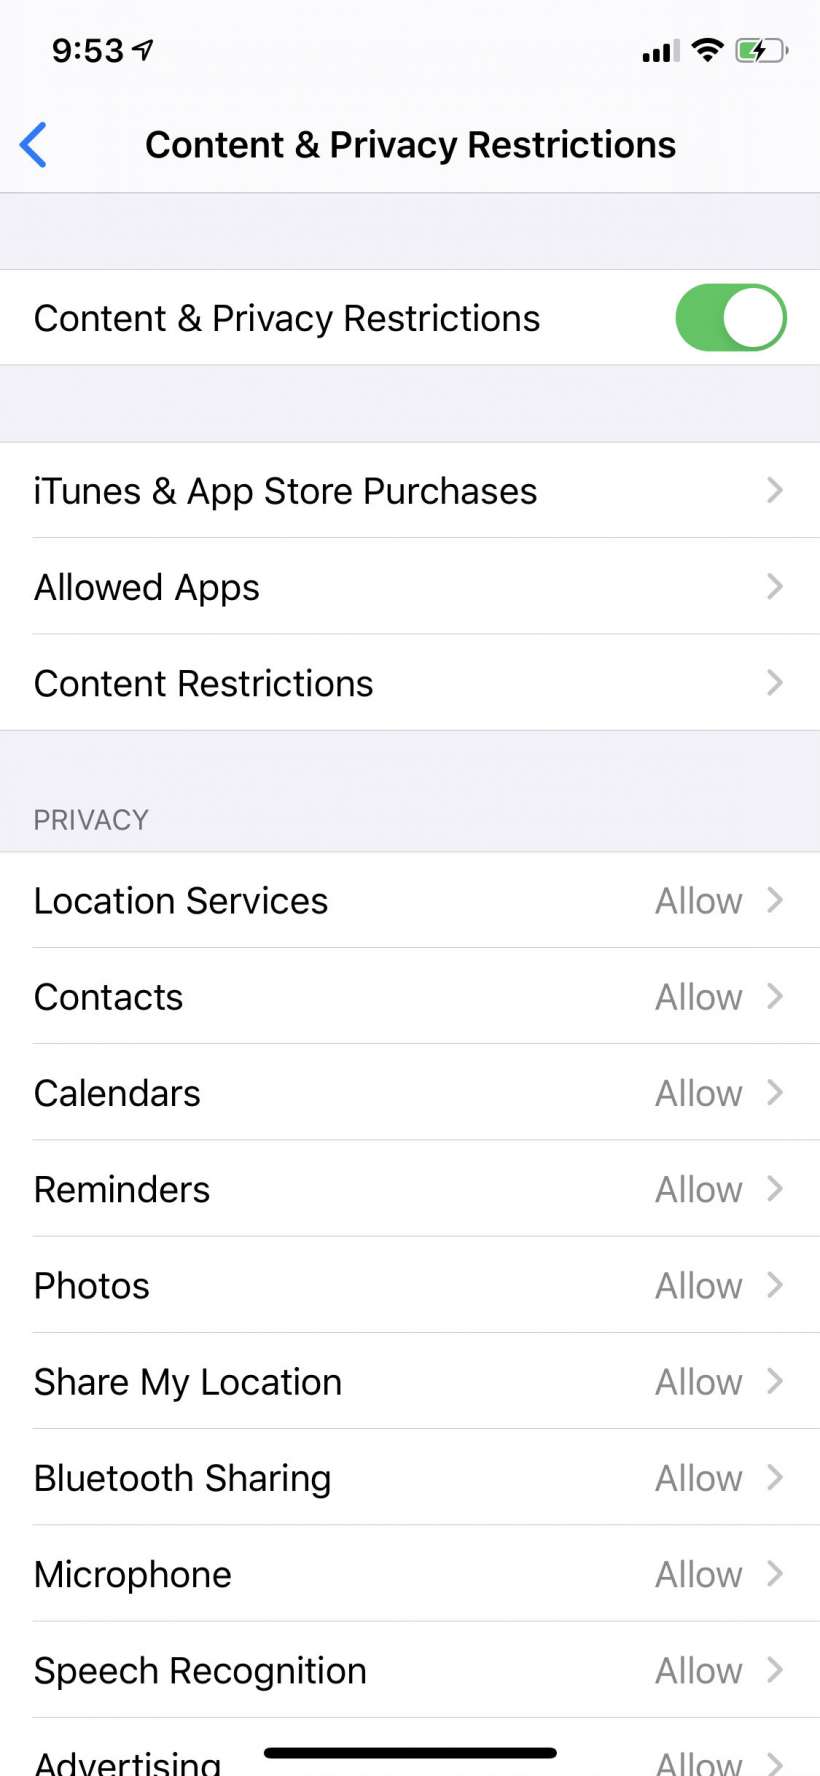 How to restrict and limit game play time on Apple Arcade on iPhone and iPad.